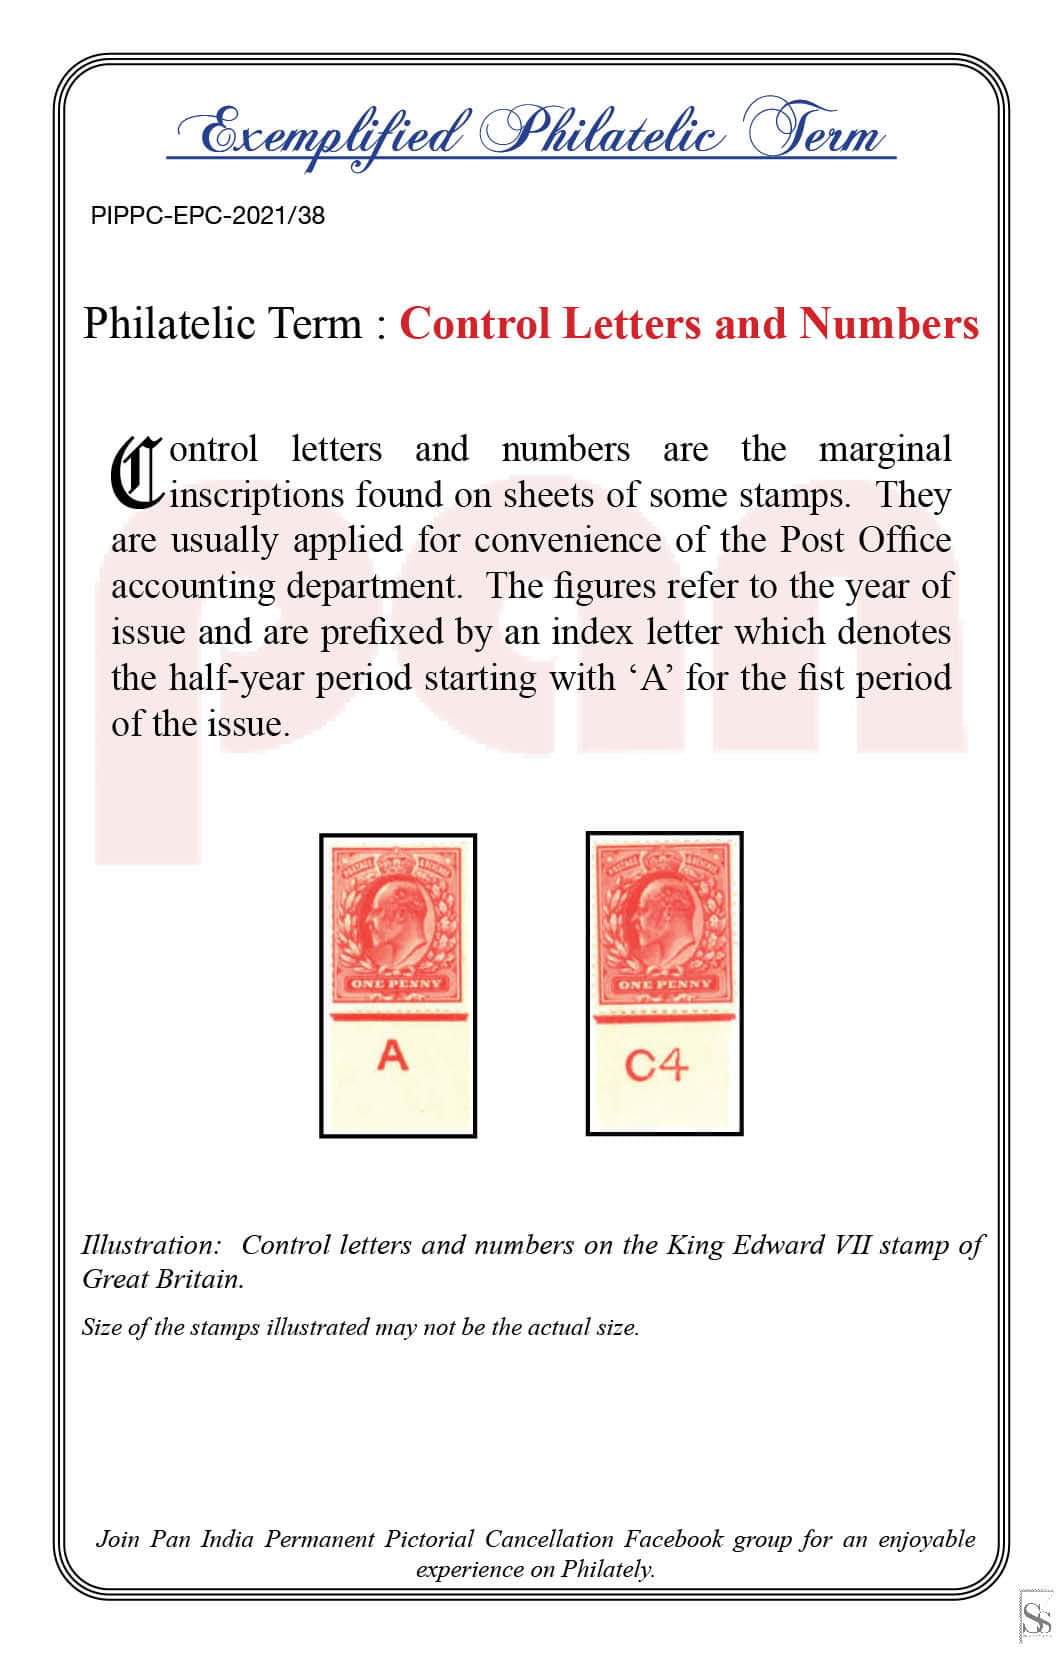 38. Today's Exemplified Philatelic term- Control Letters and Numbers